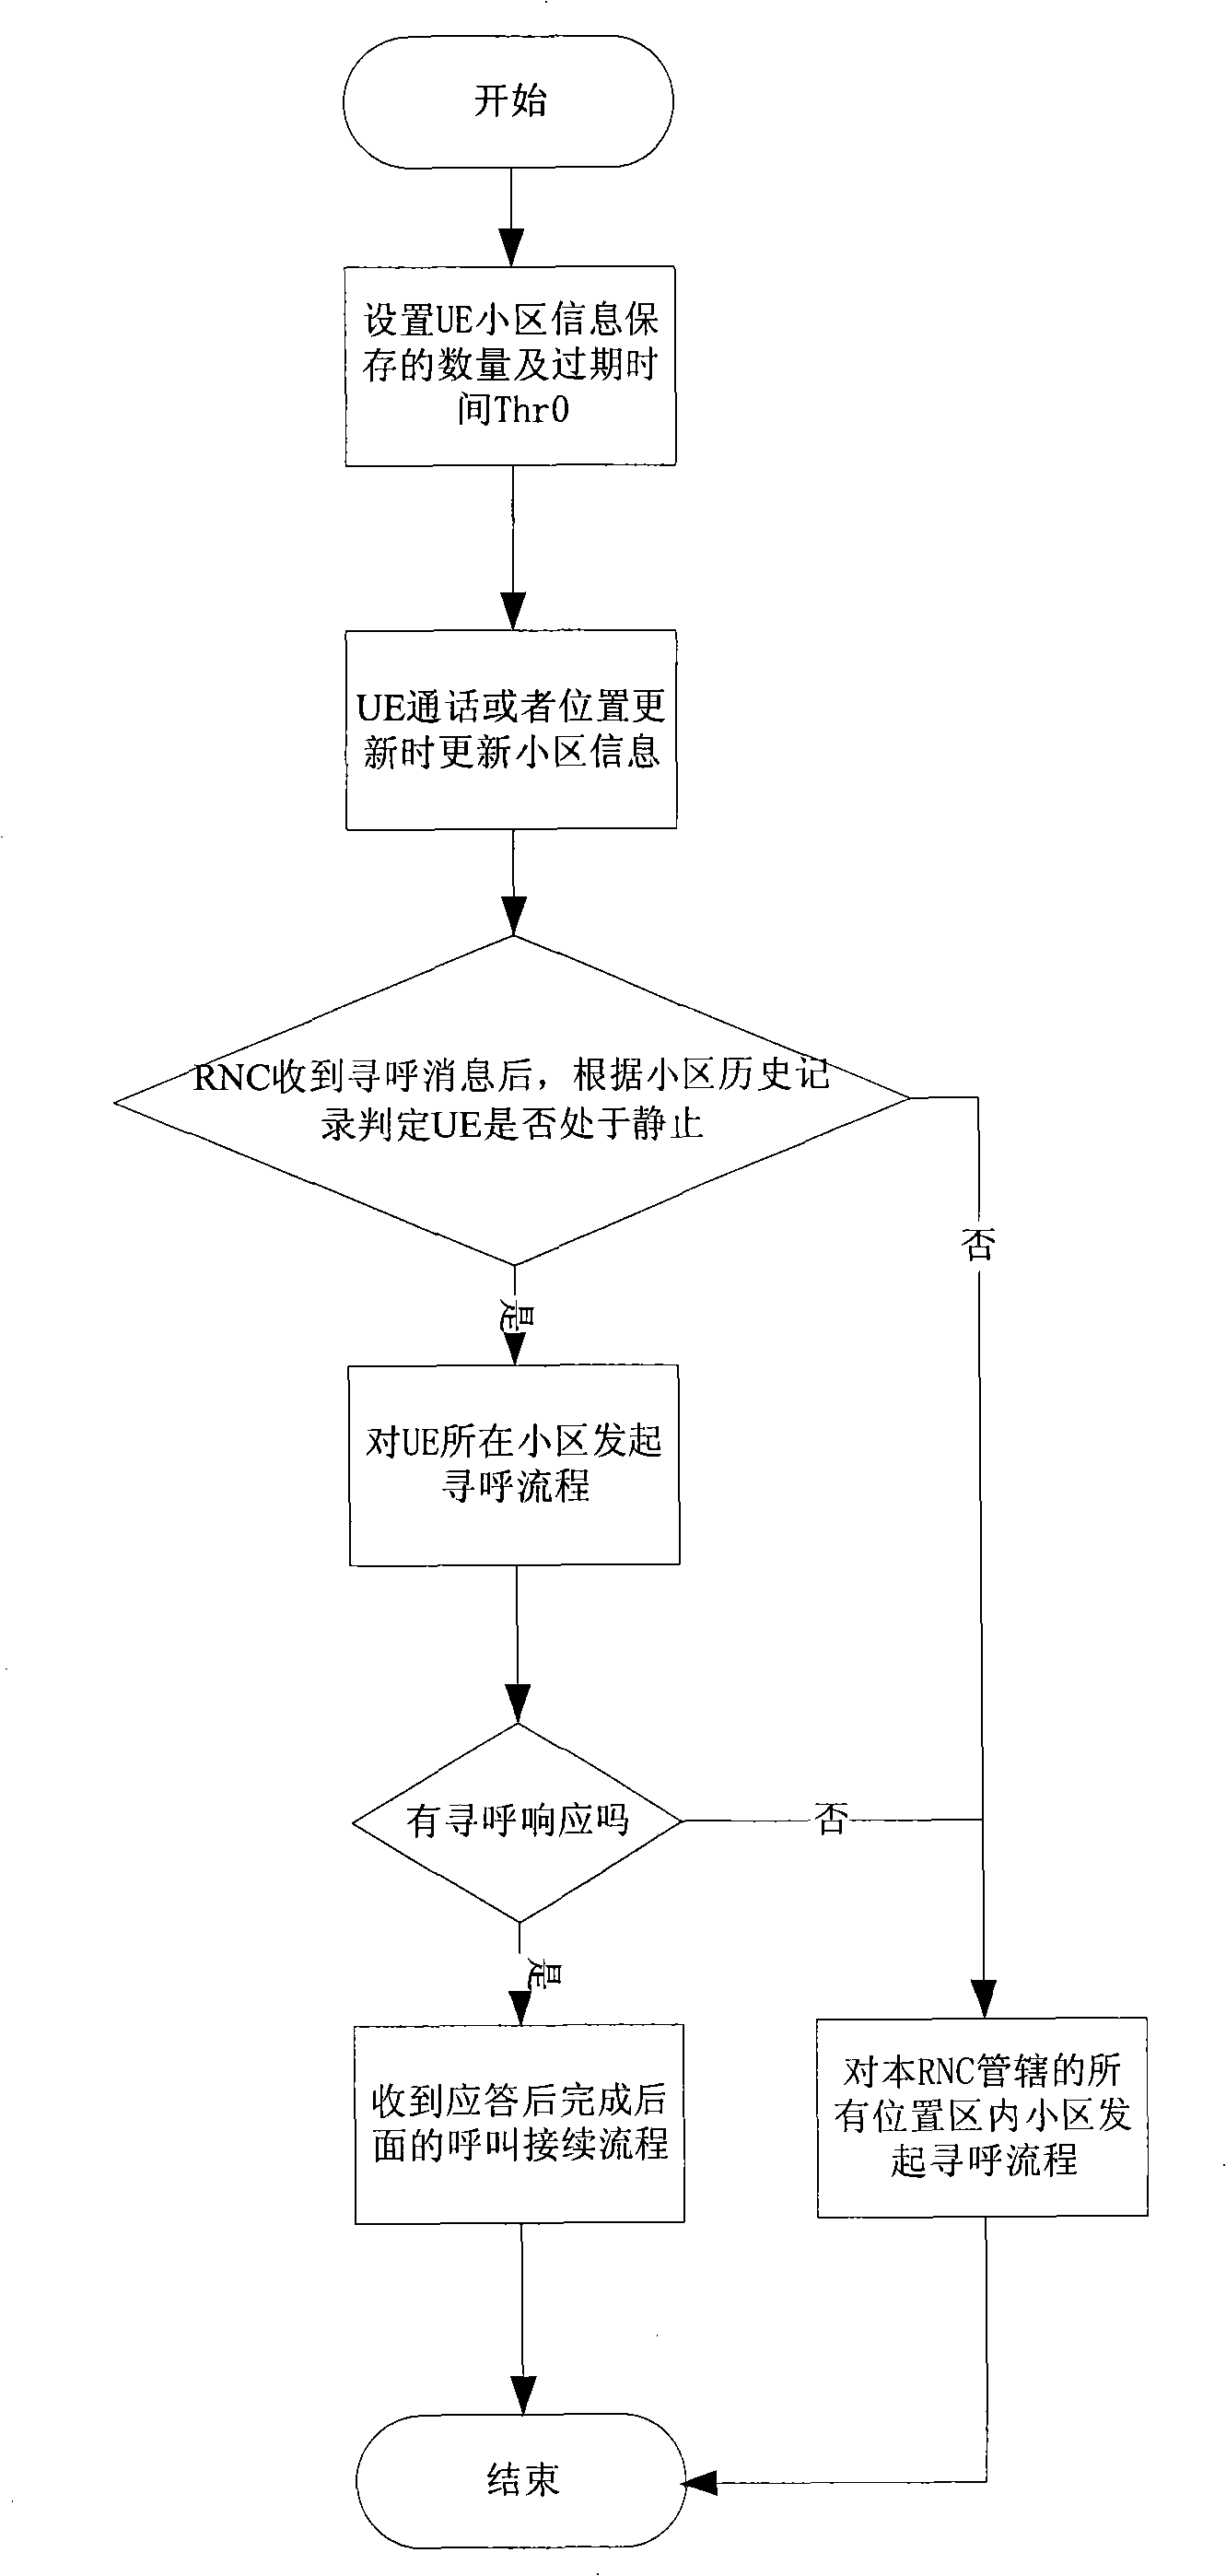 Method for implementing customer terminal calling in wireless communication system